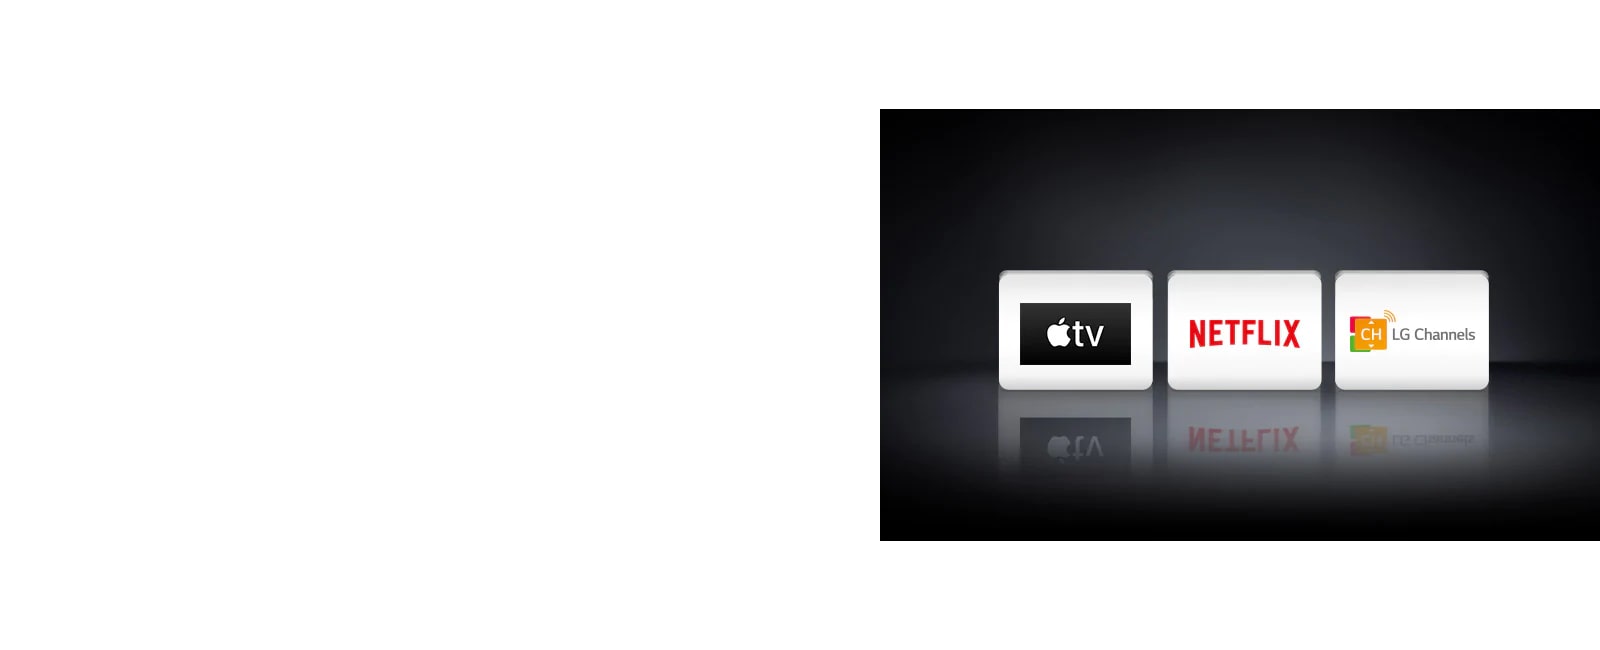 Three app logos shown from left to right: Apple TV, Netflix and LG Channels.